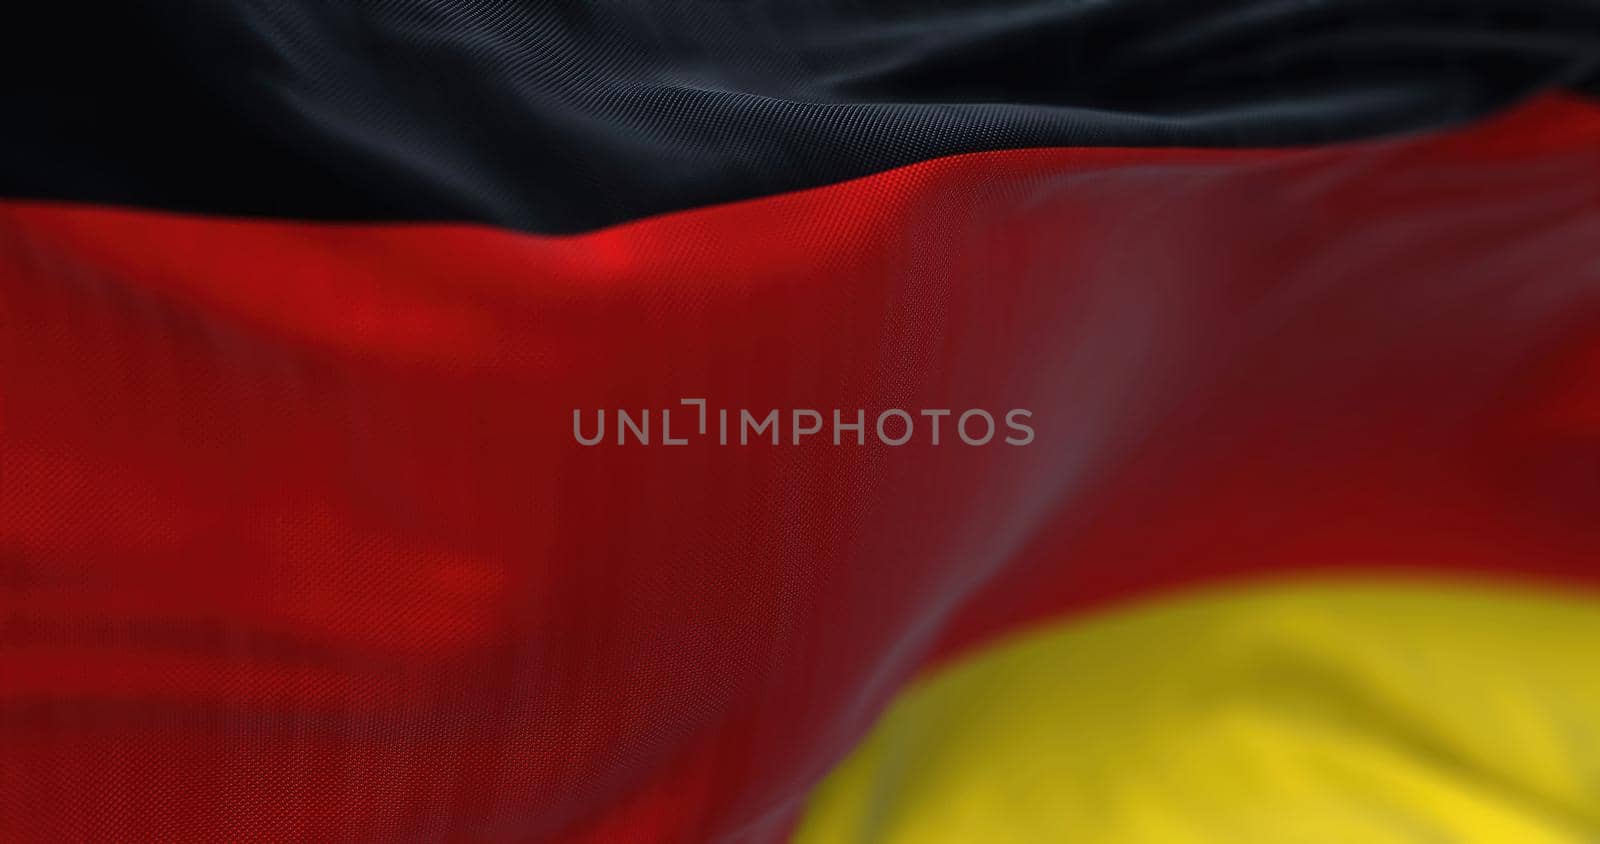 Close-up view of the German national flag waving in the wind. Germany is an European country.